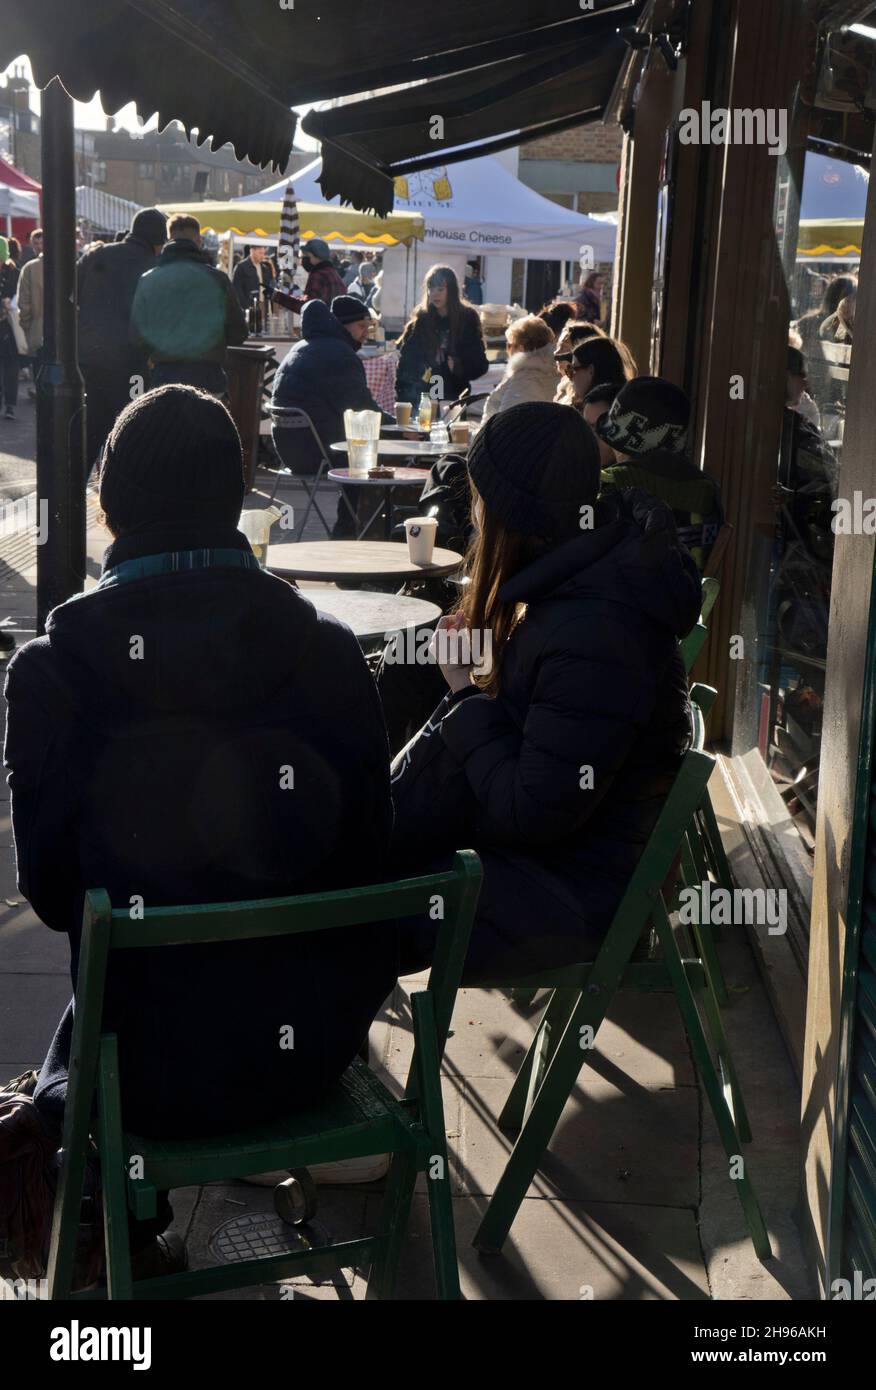 People eating and drinking at a cafe in Broadway market in Hackney,London,England,UK Stock Photo